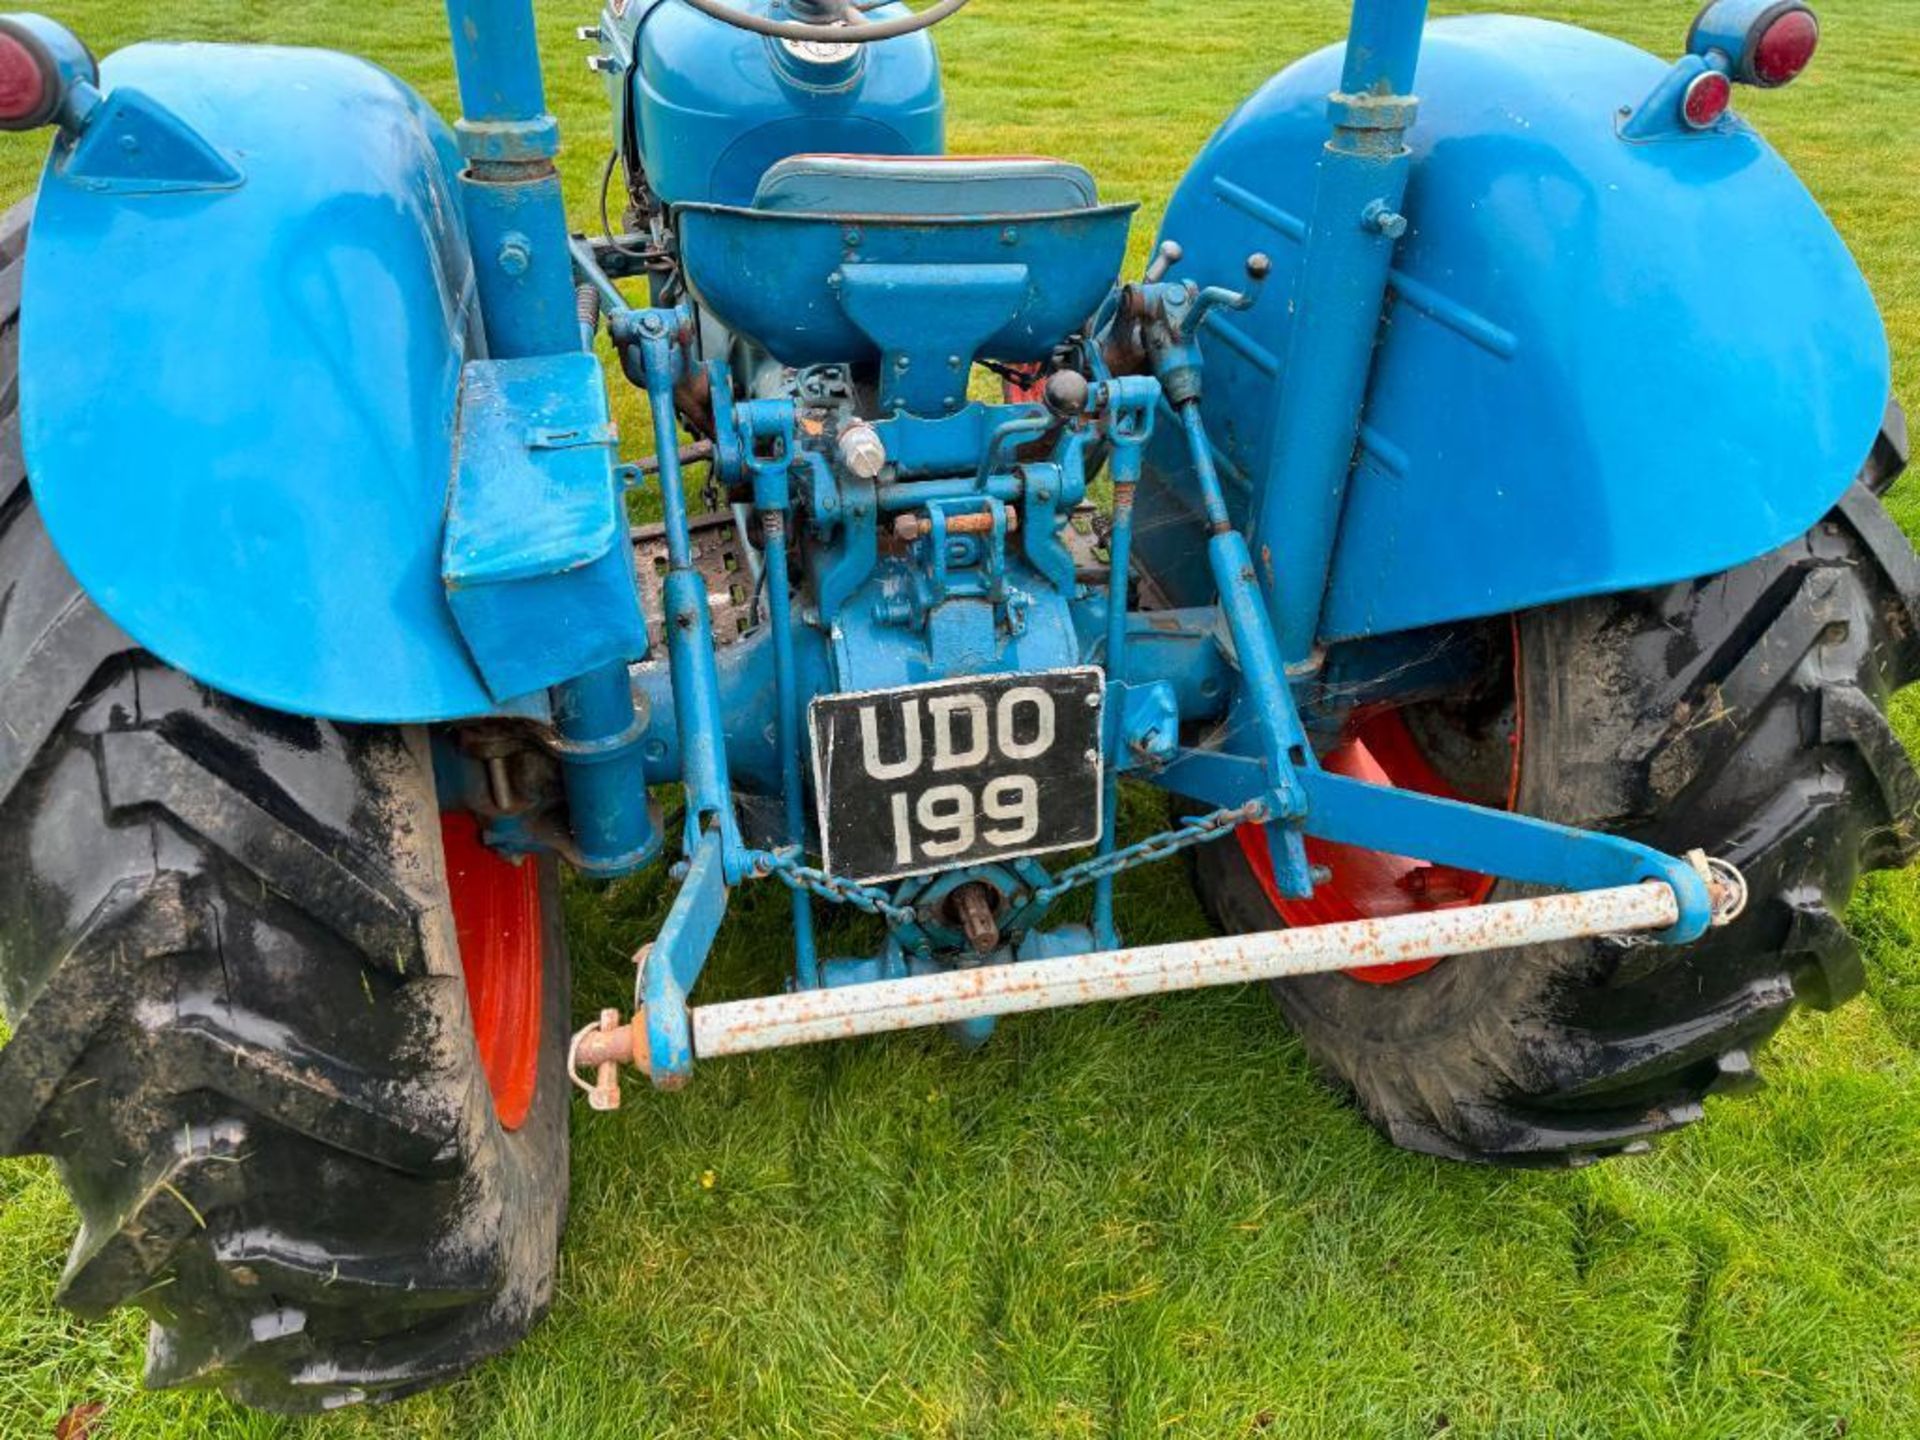 1962 Fordson Dexta 2wd diesel tractor with pick up hitch, rear linkage and rollbar on 12.4/11-28 rea - Image 6 of 14